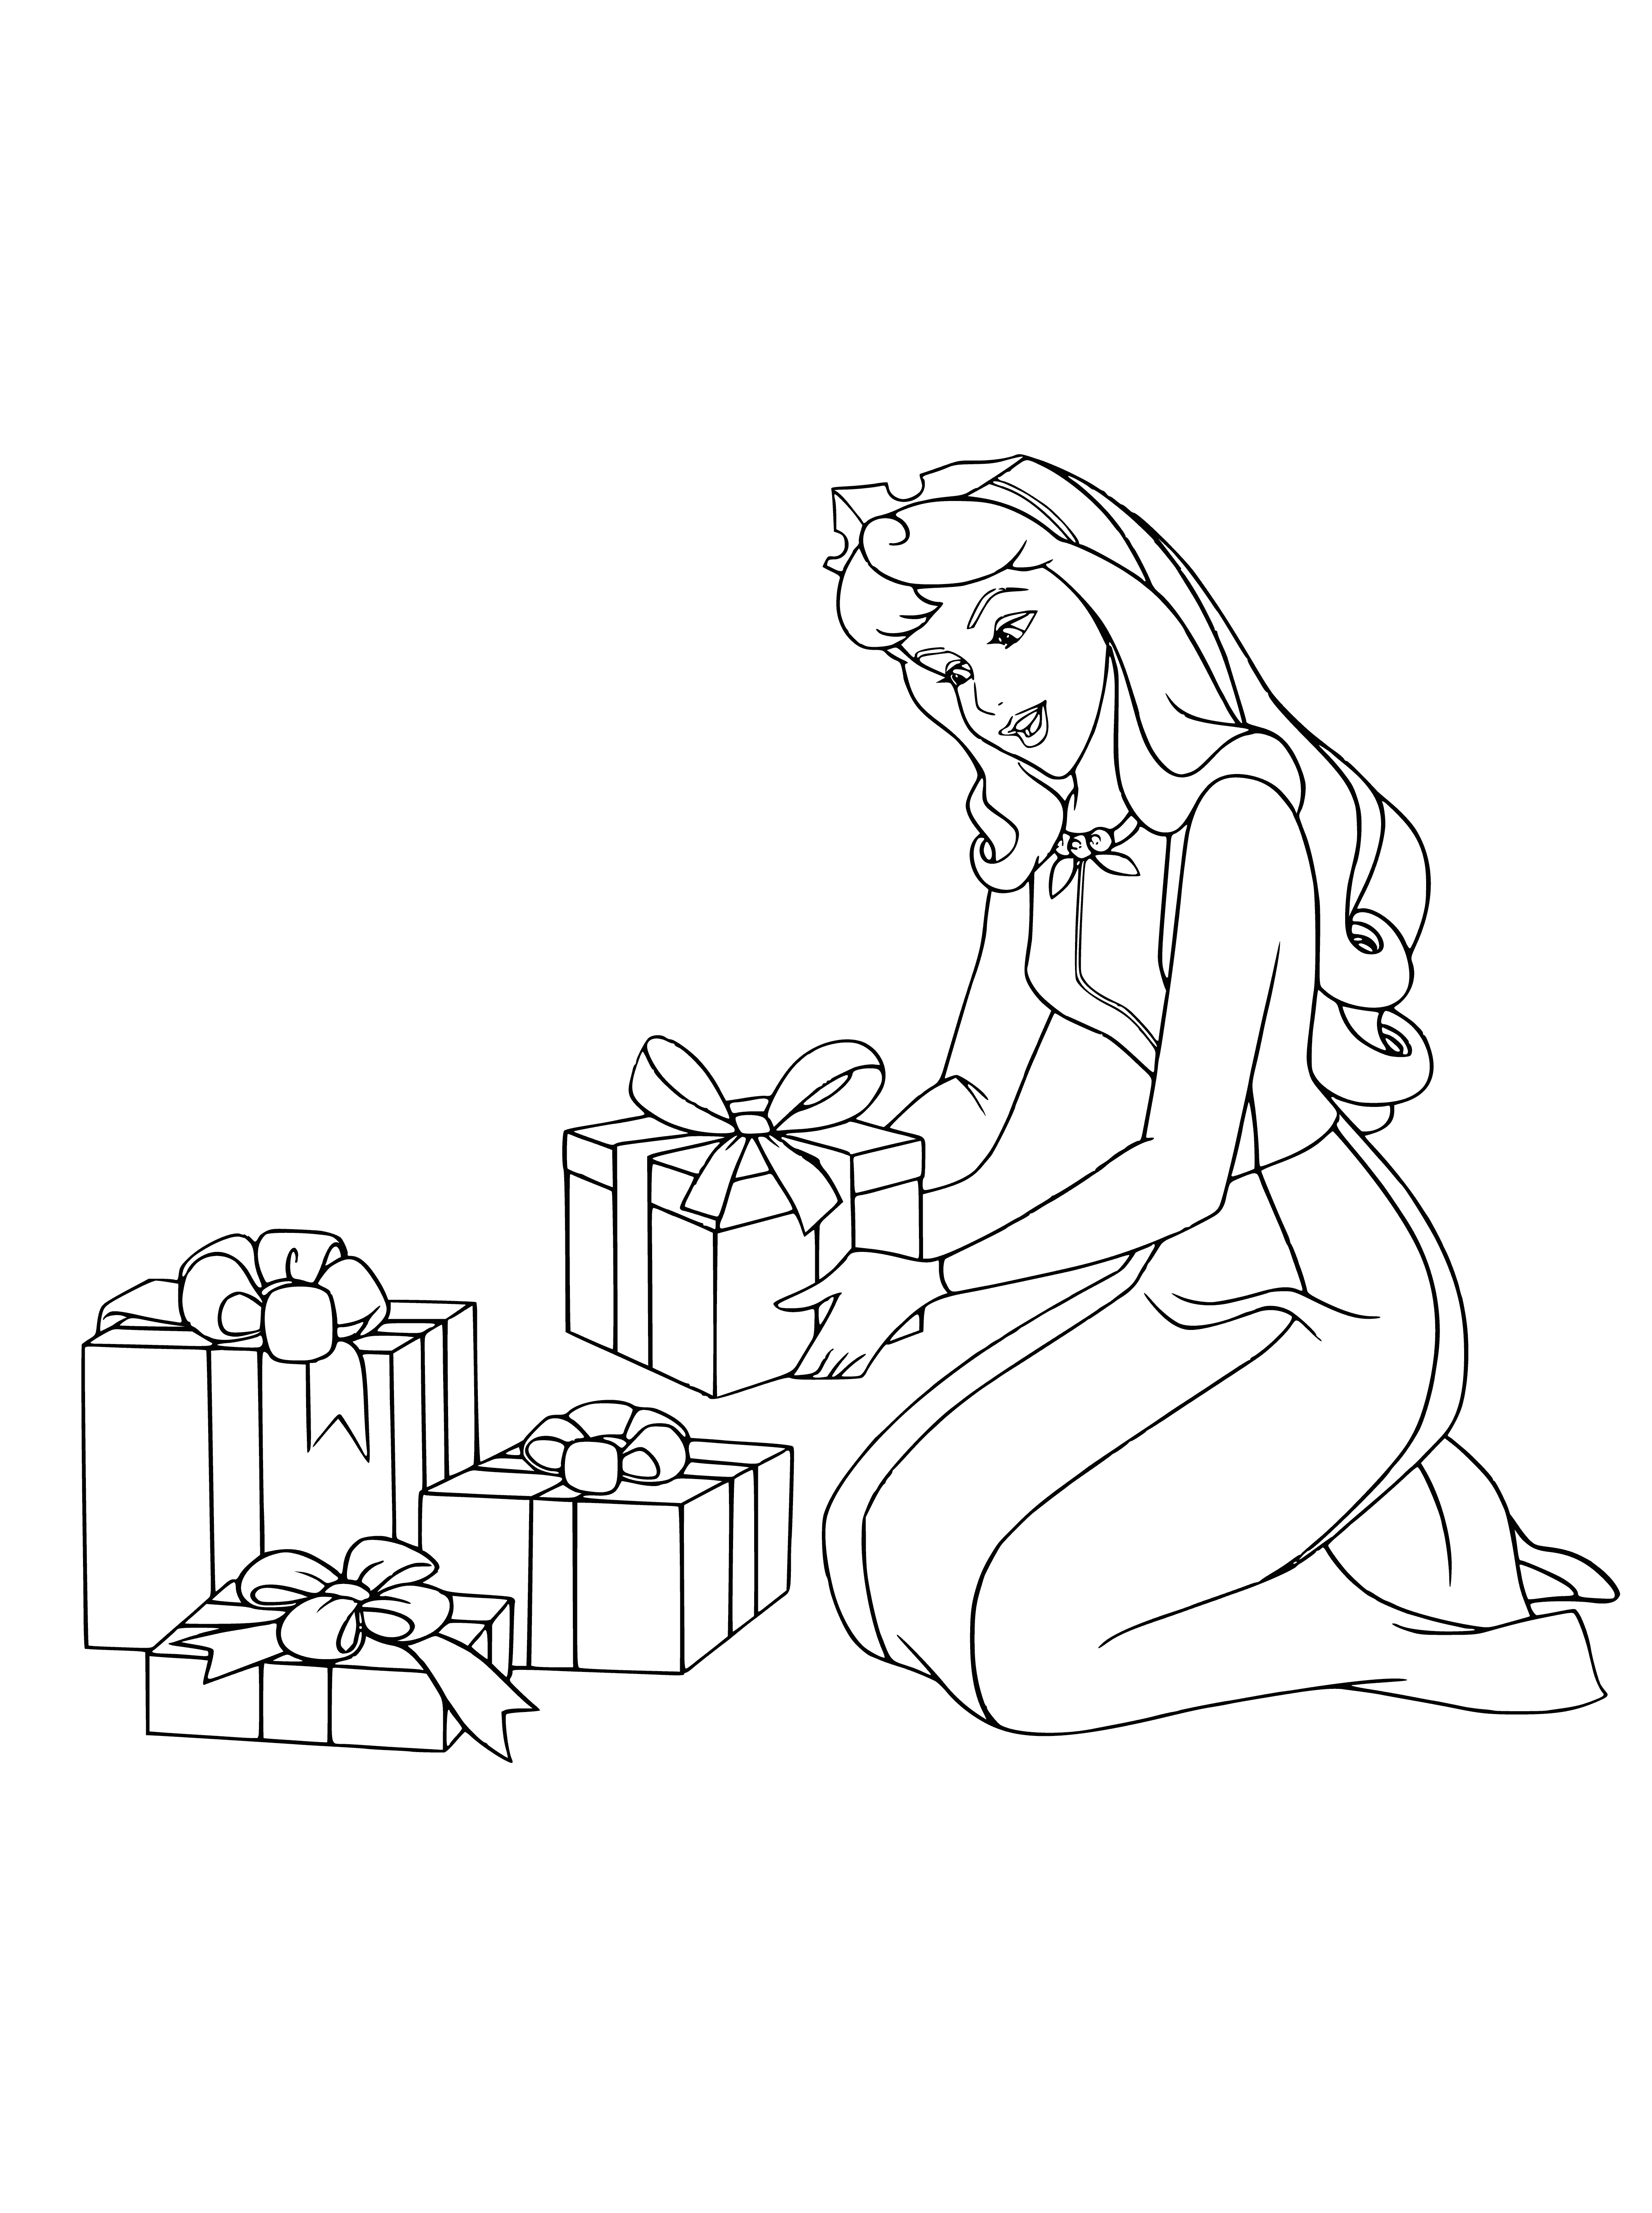 coloring page: Disney princesses celebrate New Year; Aurora in the middle surrounded by Snow White, Cinderella, Pocahontas, Mulan and Jasmine, all smiling and happy.